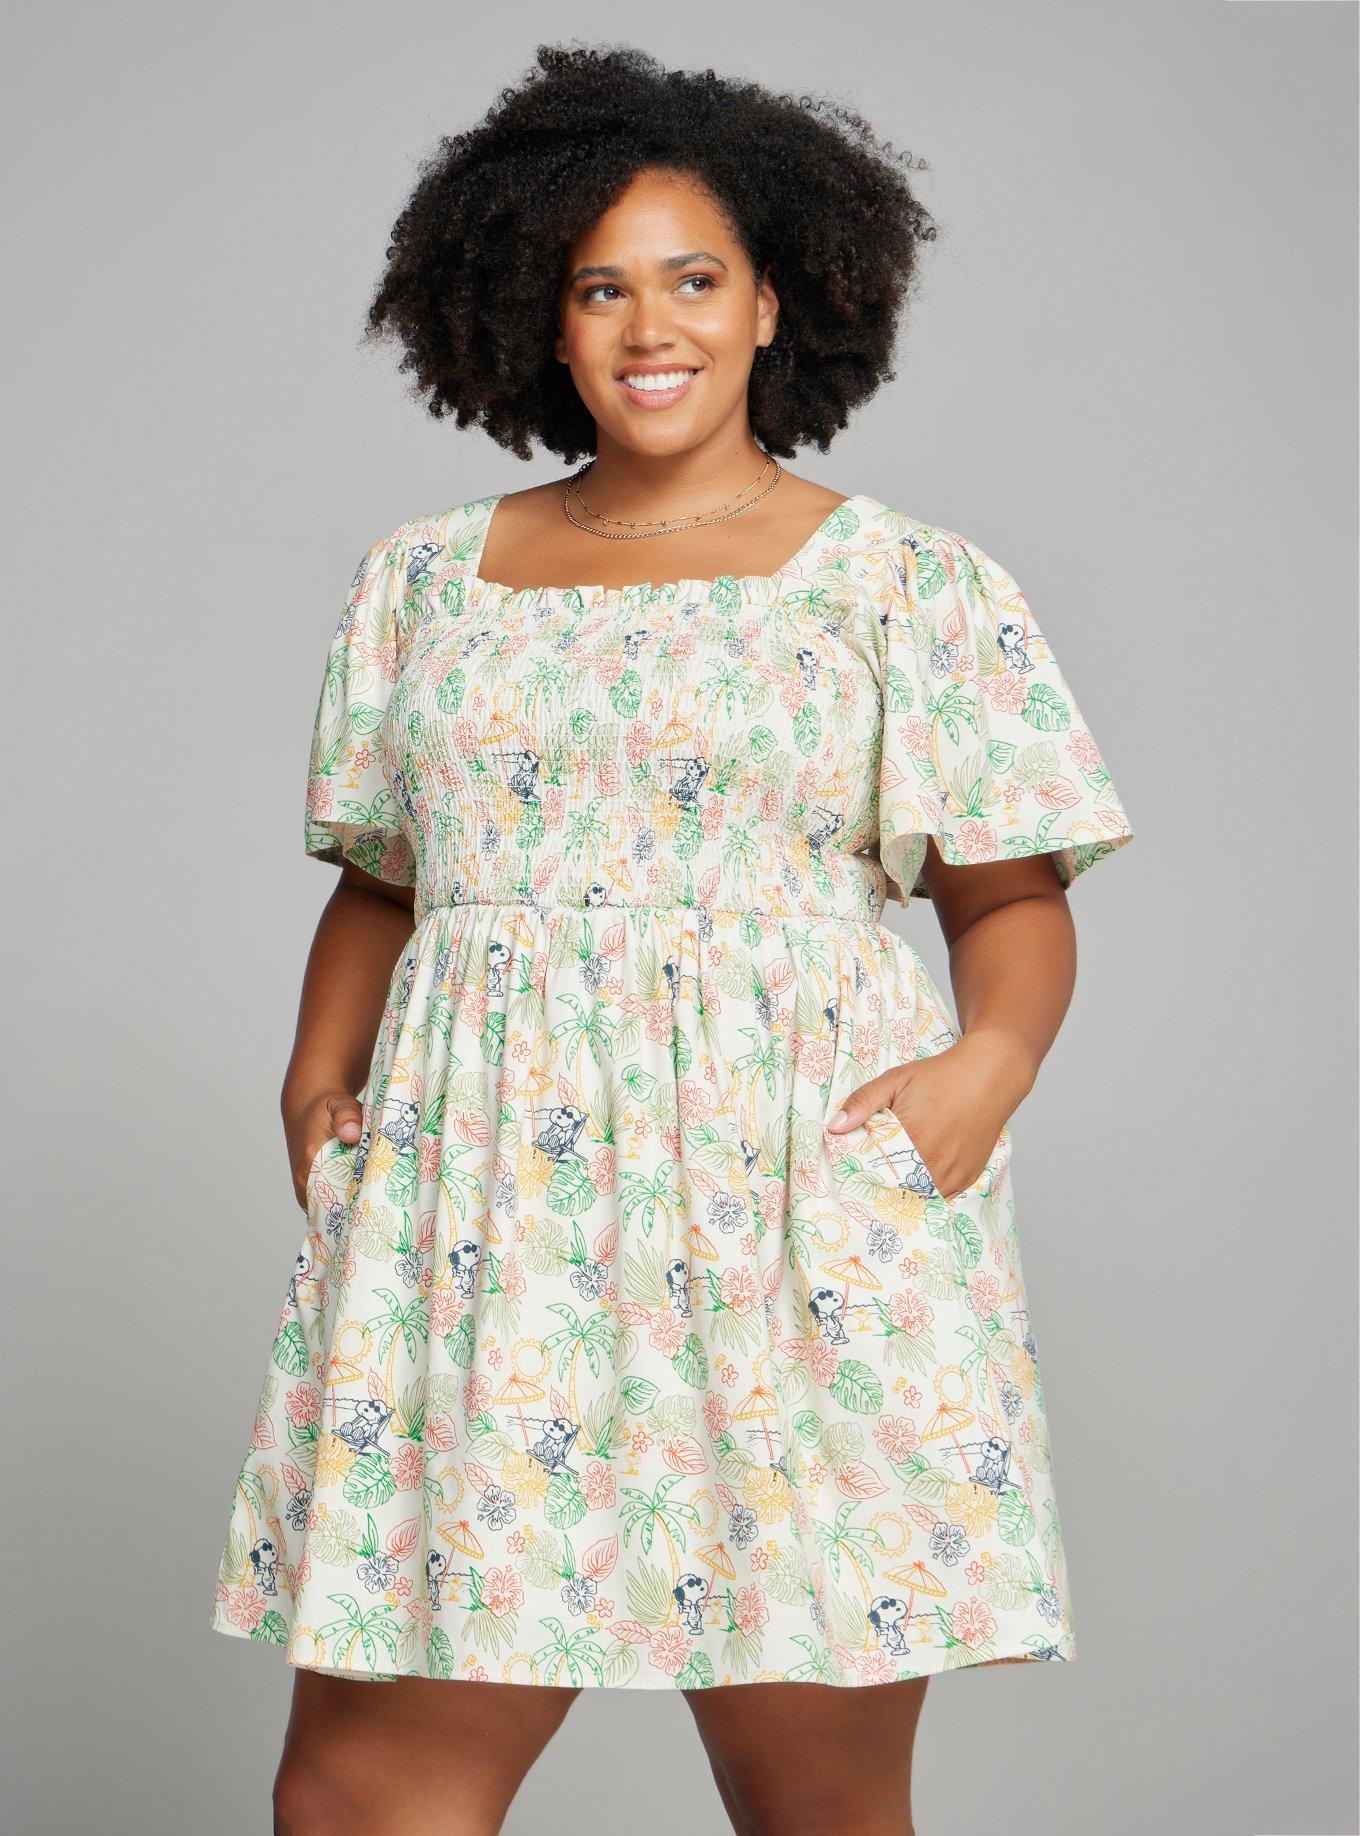 Peanuts Snoopy Tropical Allover Print Plus Size Smock Dress - BoxLunch Exclusive, MULTI, hi-res